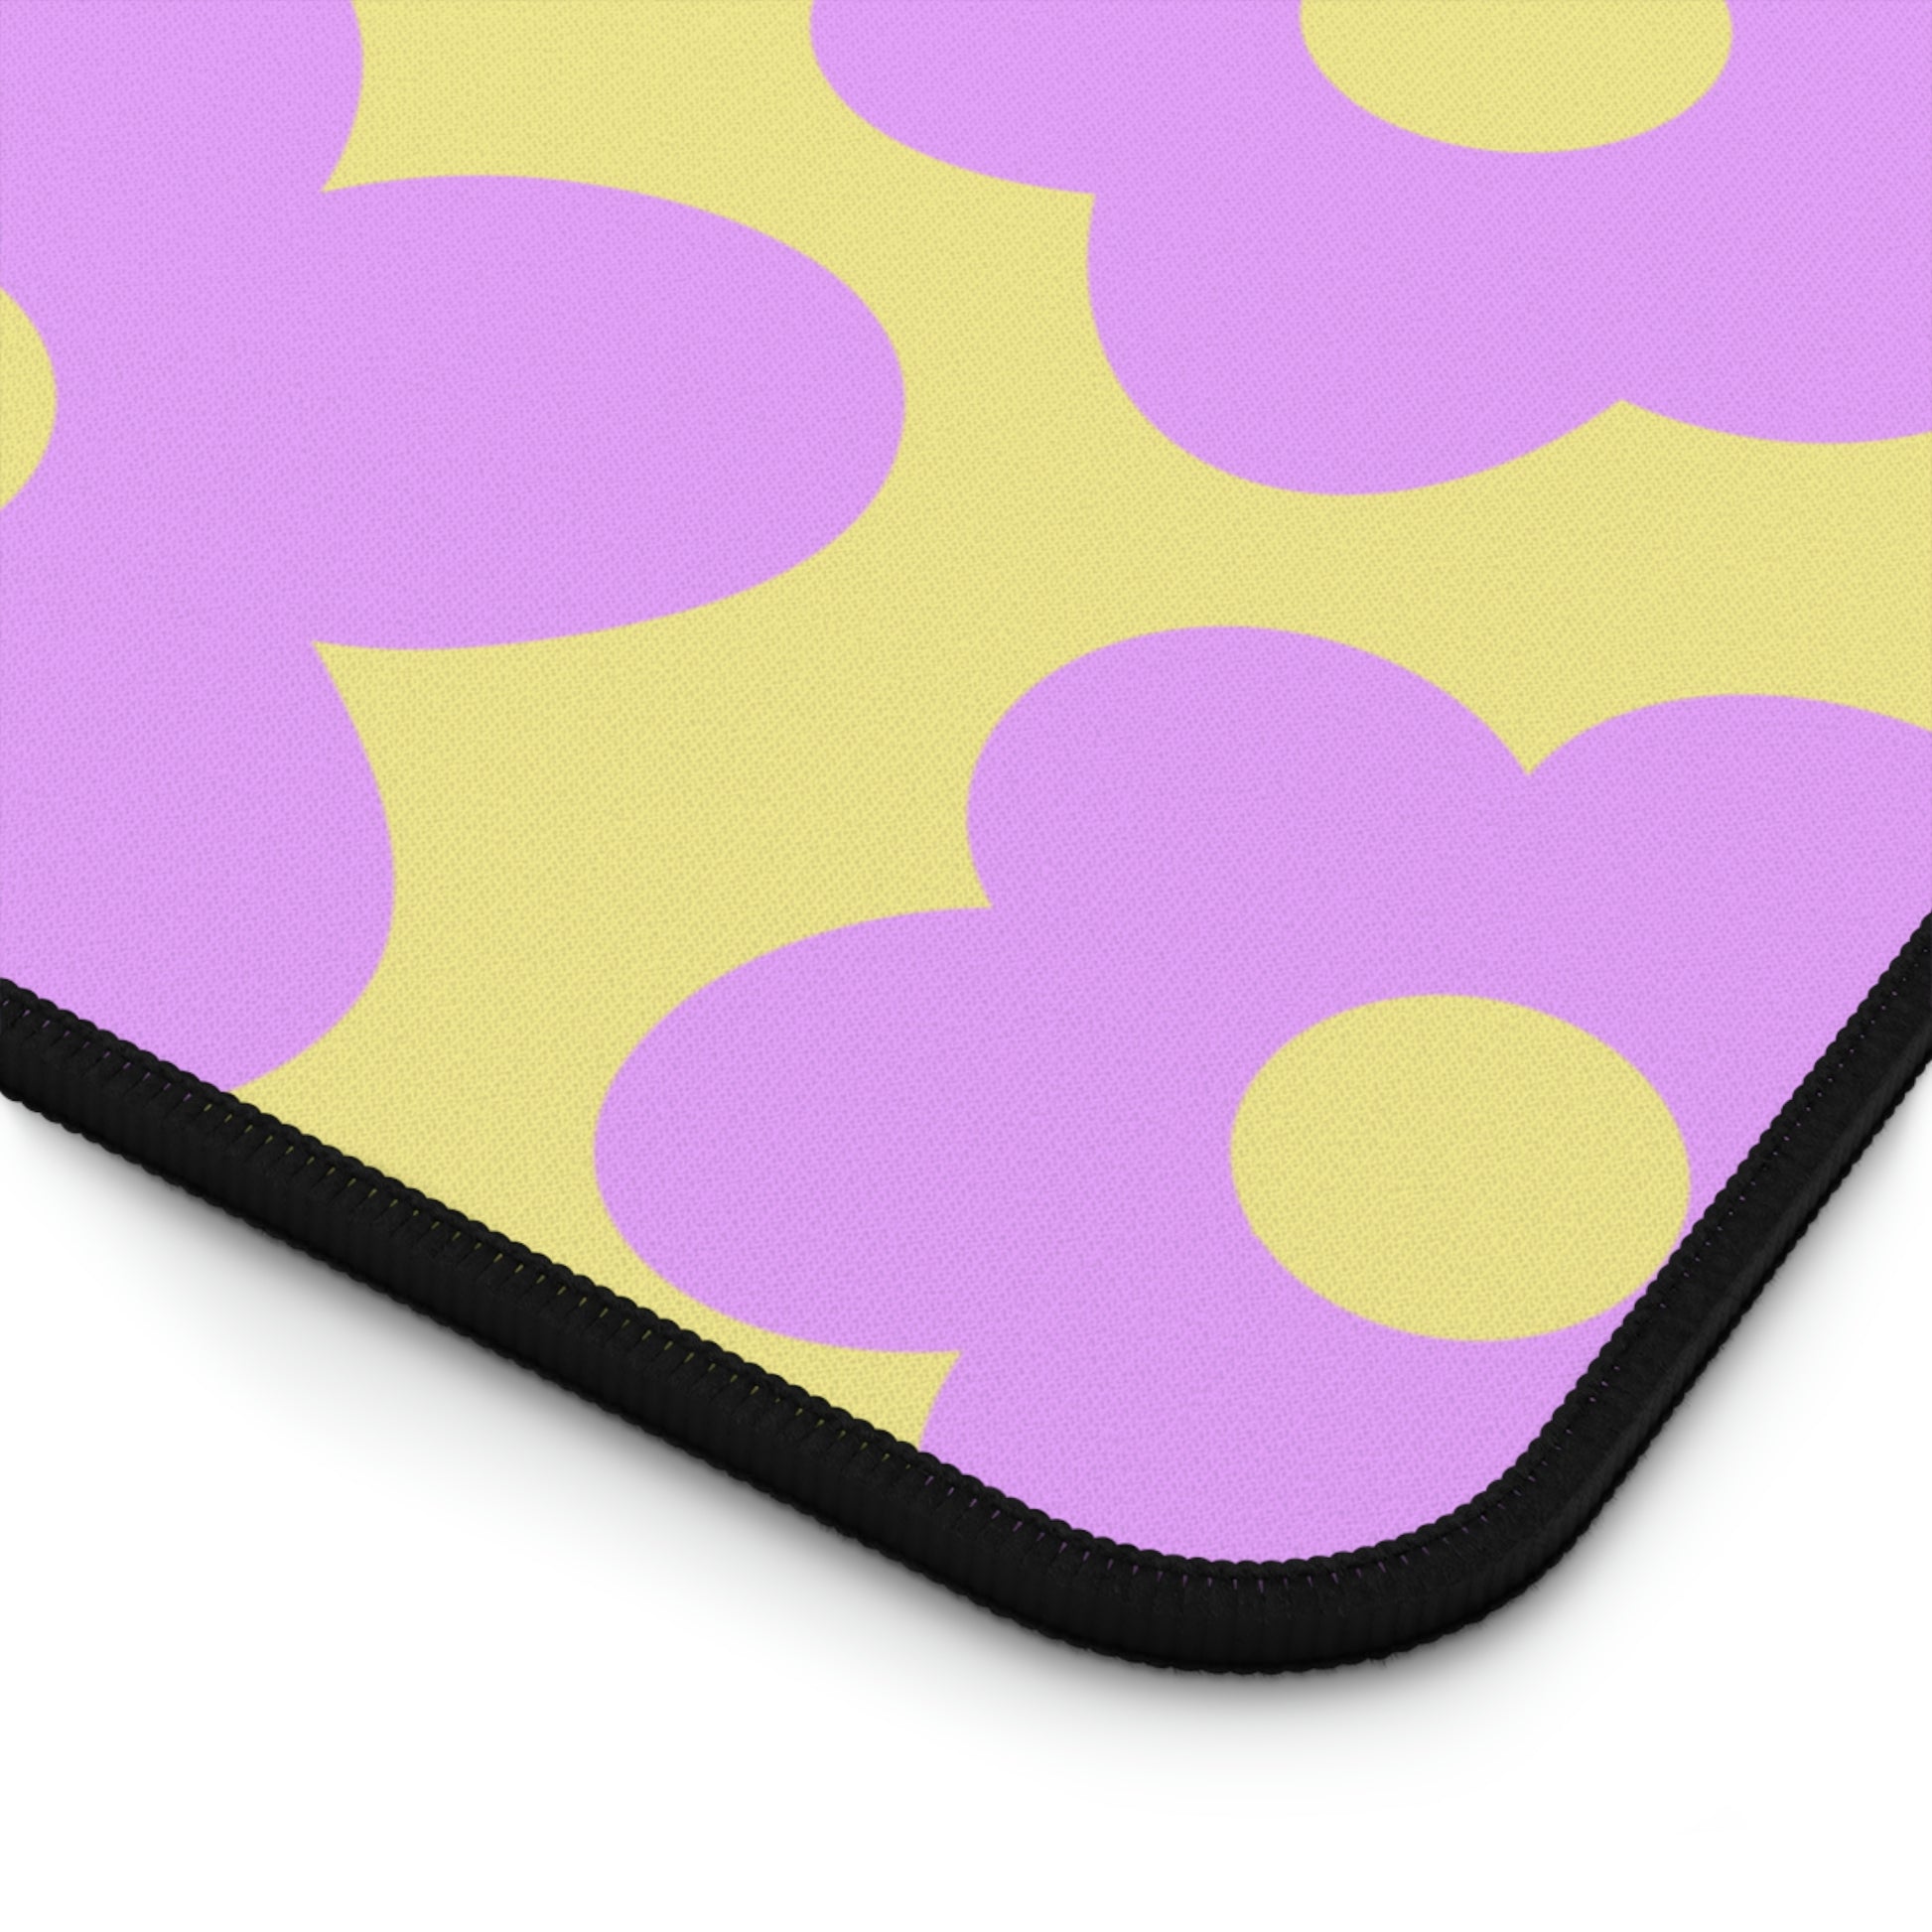 The corner of a 12" x 22" desk mat with purple flowers on a yellow background.